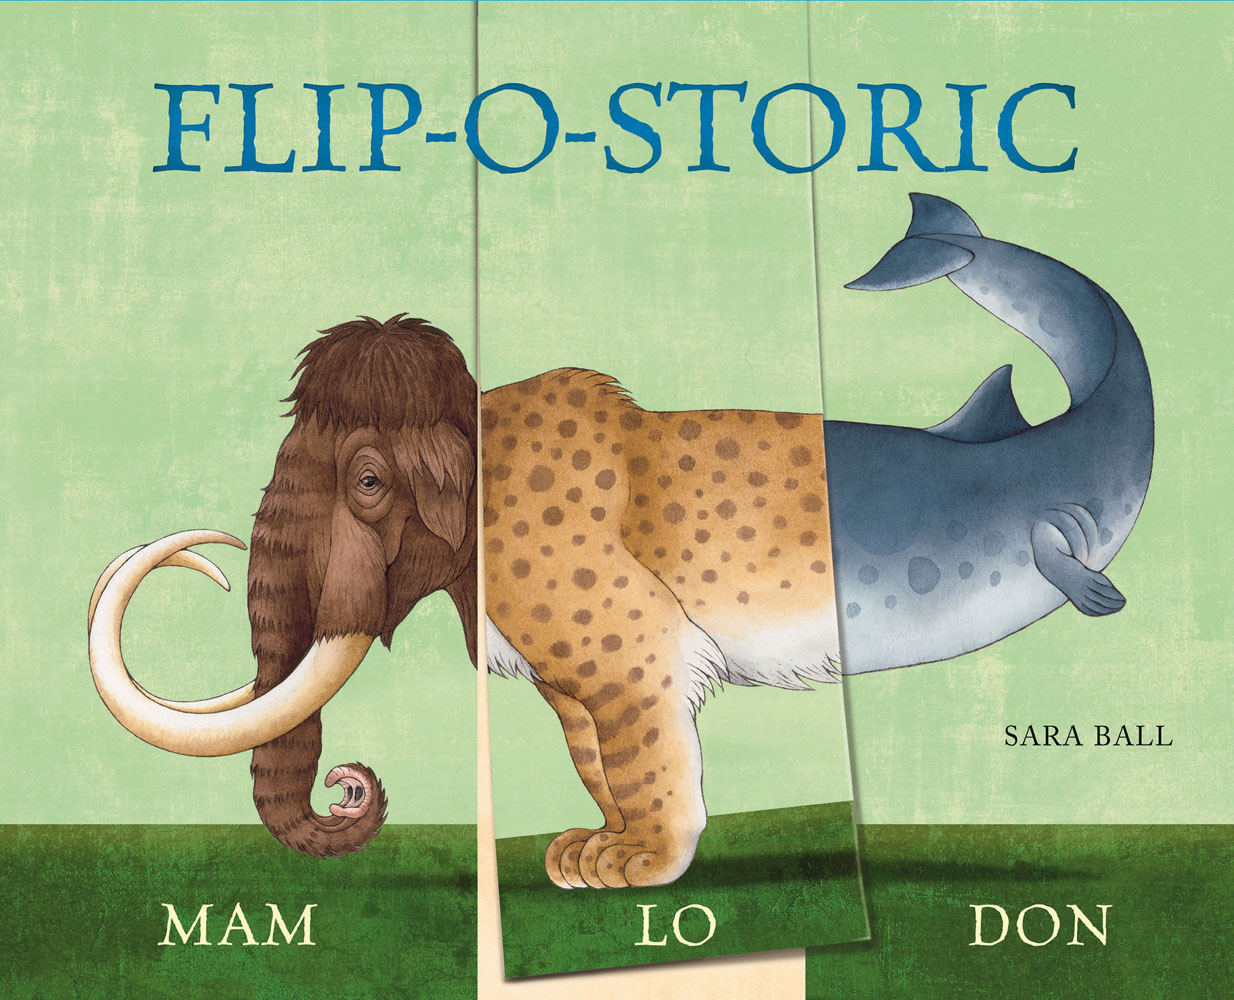 3 sections, head of woolly mammoth, body of leopard, tail of shark, FLIP-O-STORIC in blue font above.